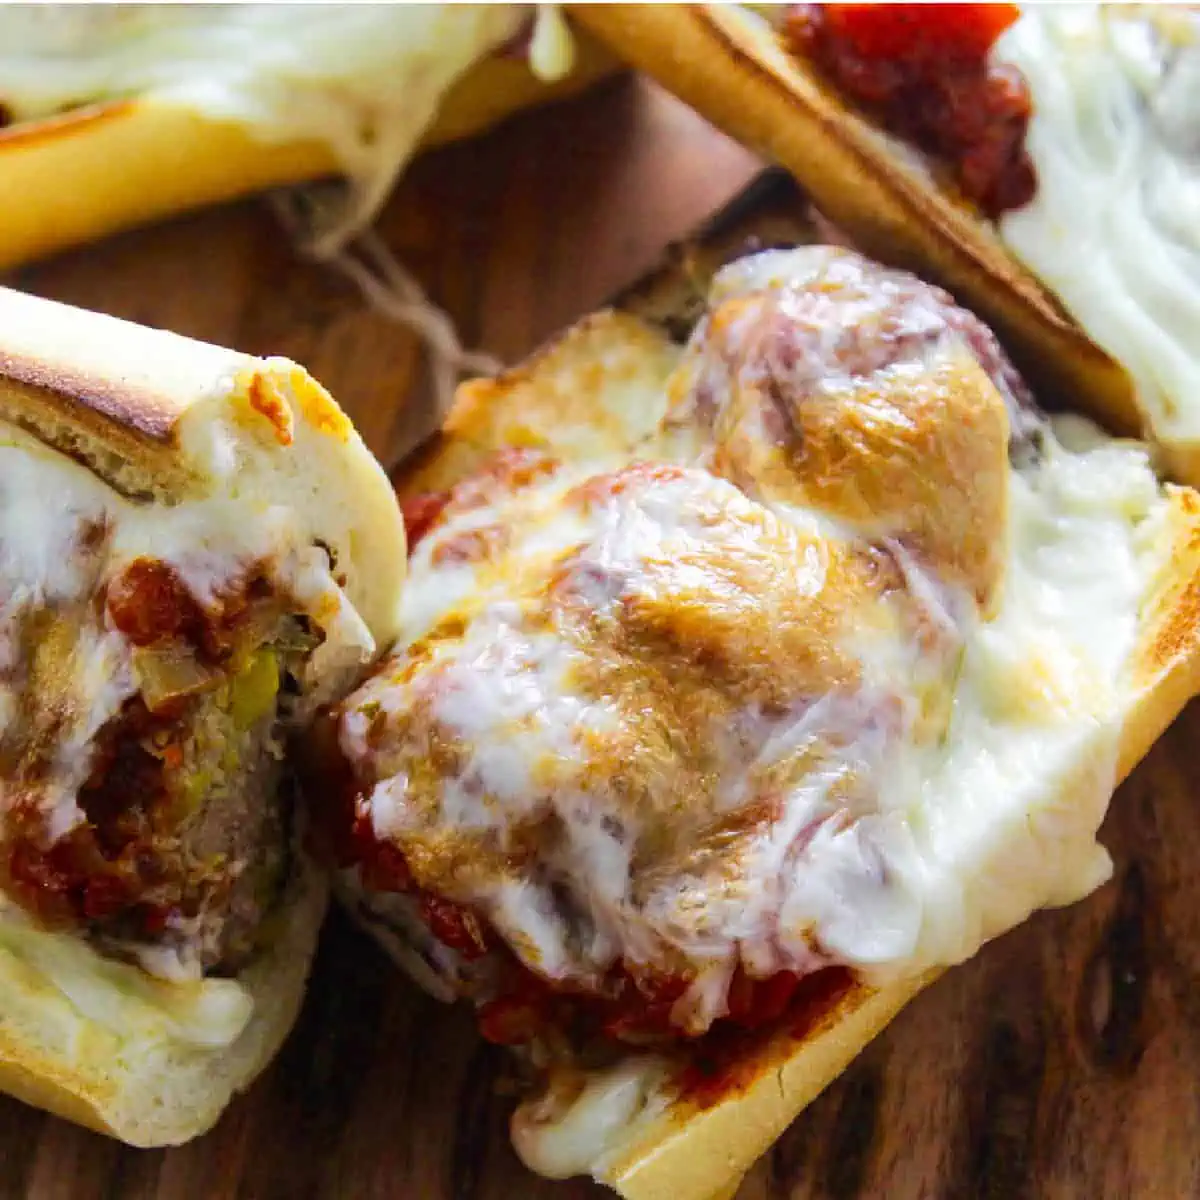 A meatball sub with marinara sauce and melted golden gooey cheese on a toasted baguette.